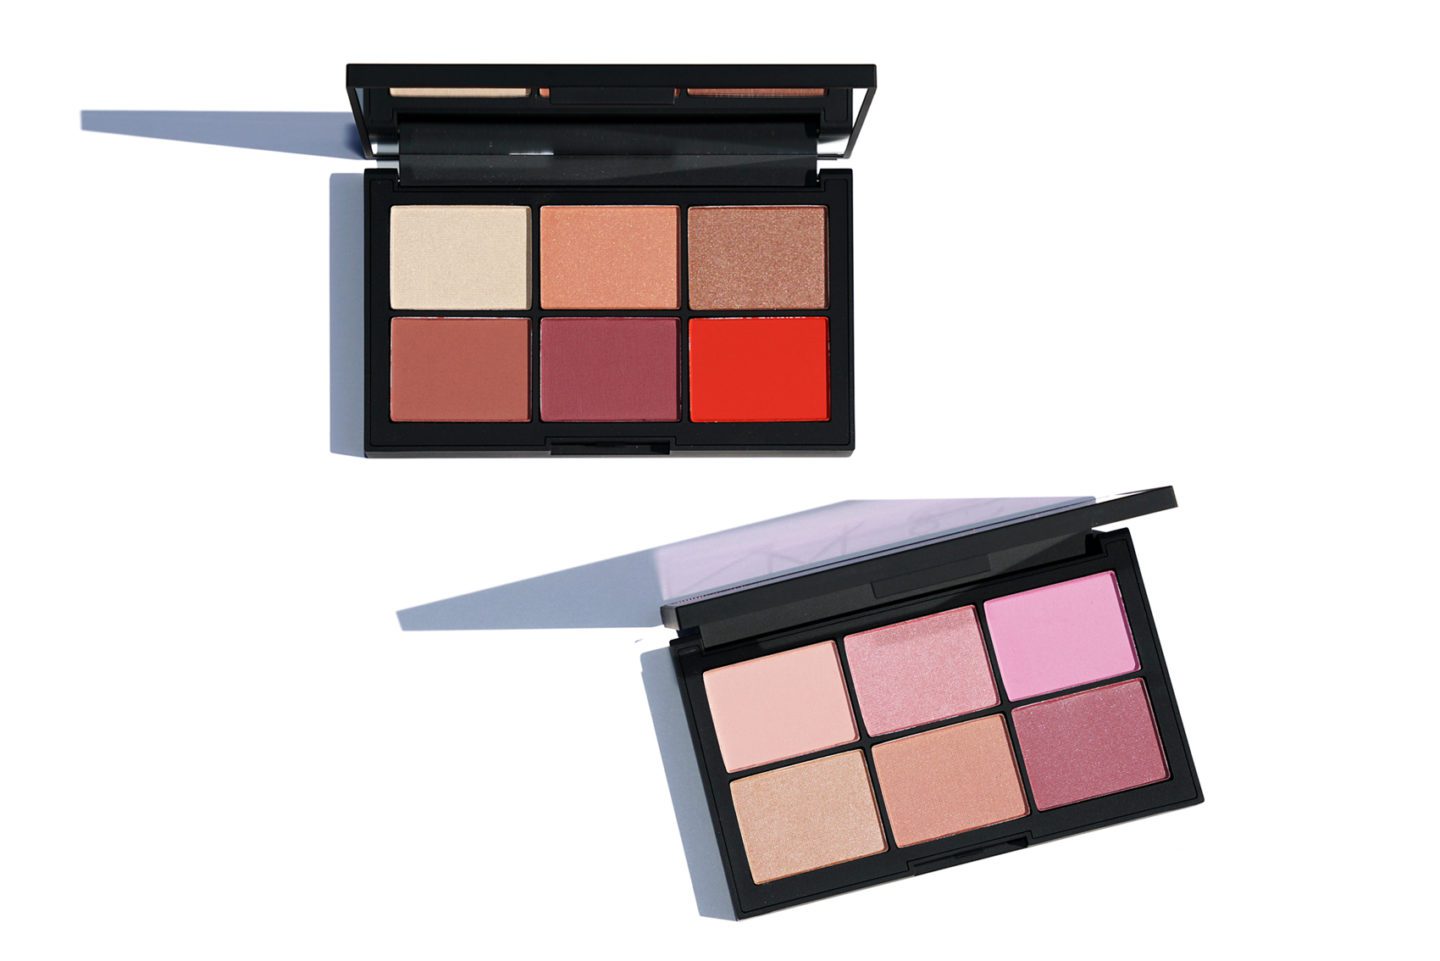 NARSissist Unfiltered Cheek Palettes I and II reviewed by Sabrina of The Beauty Look Book